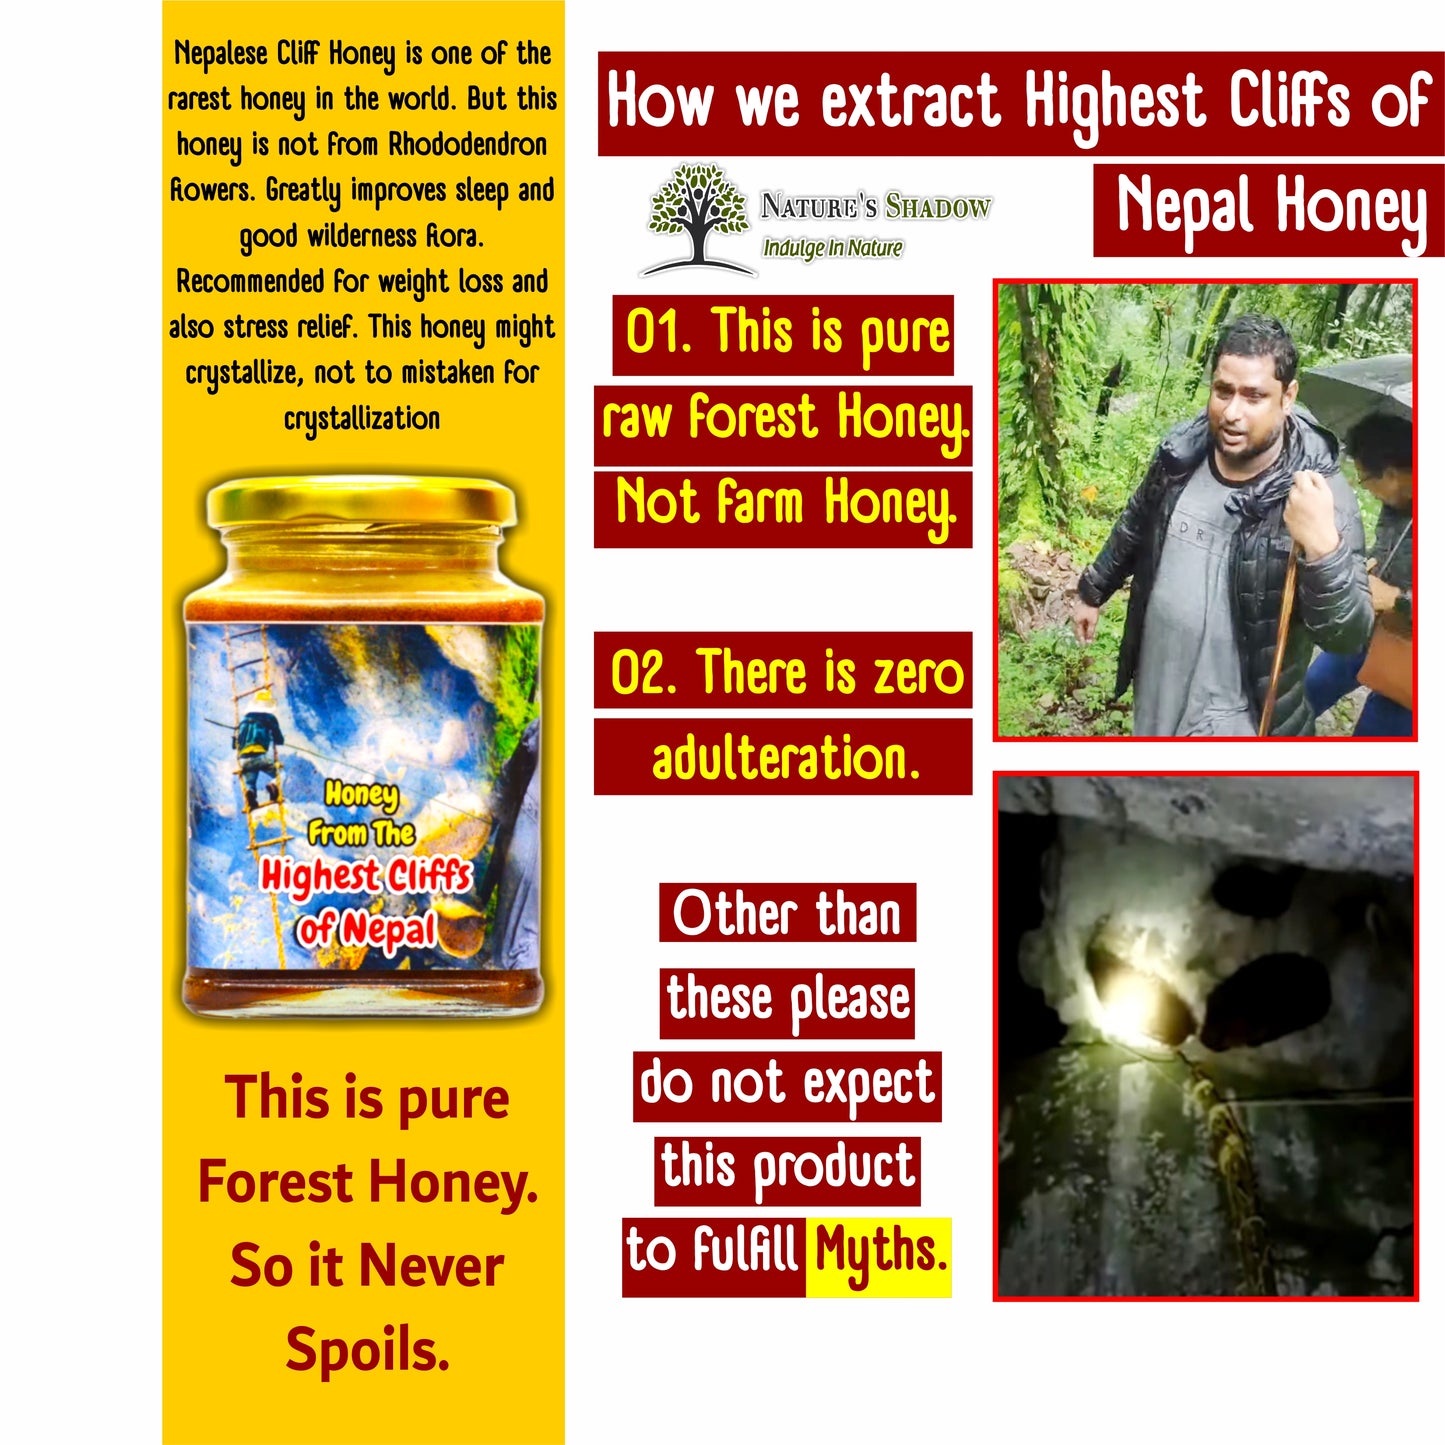 Nepalese Origin : Honey From The Highest Cliffs Of Nepal  (This honey might cryztallize easily)